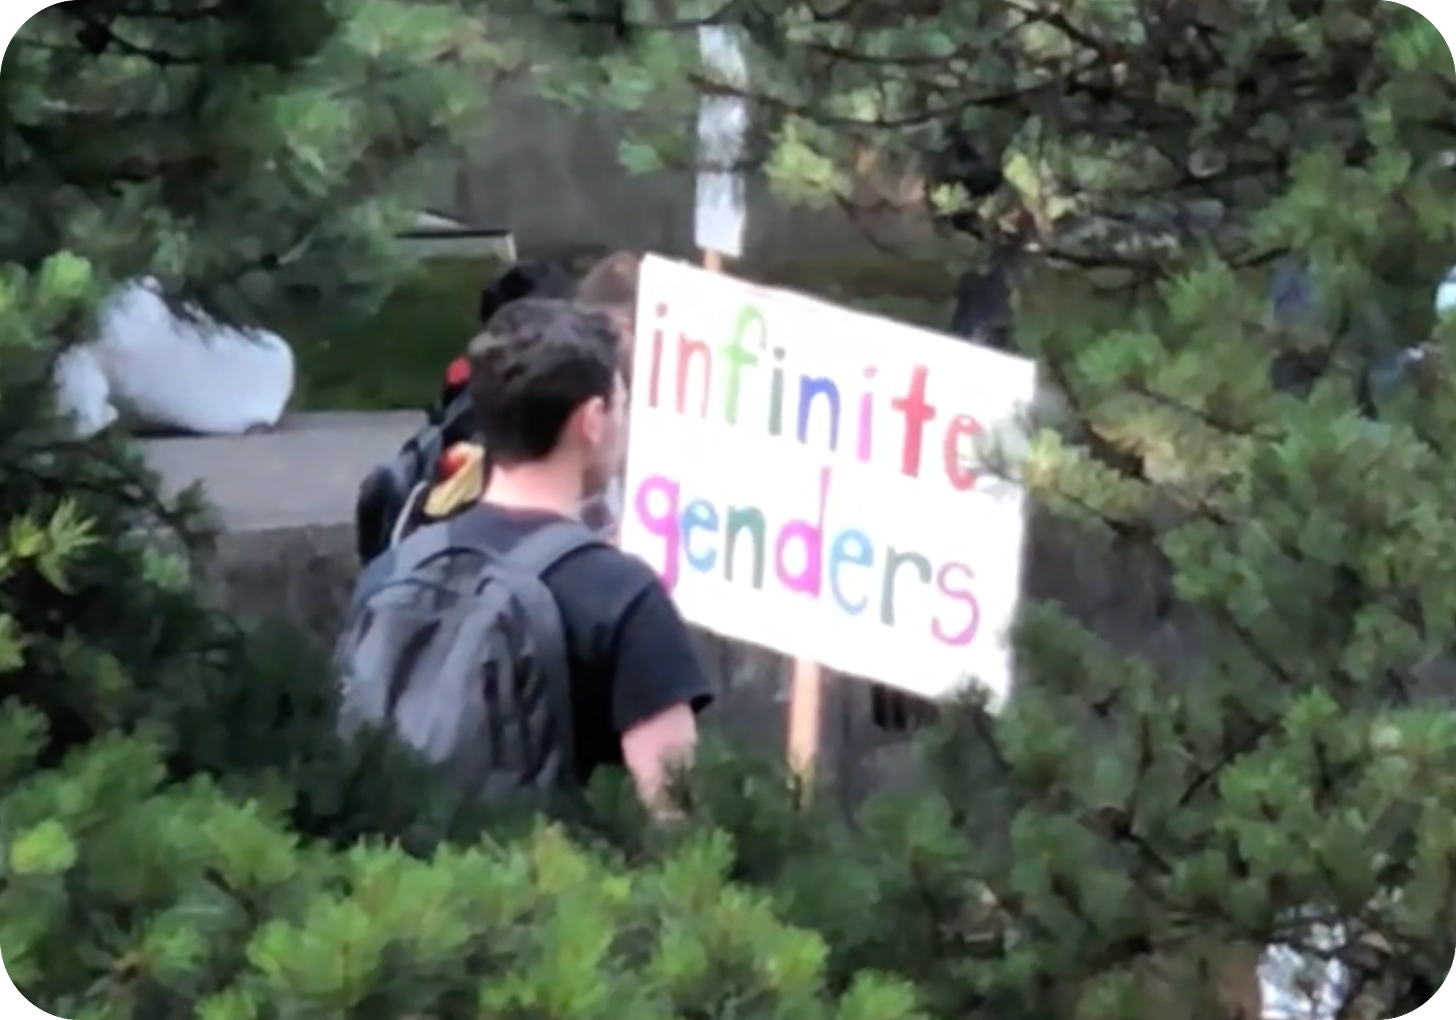 Portland protestor holding sign that reads "infinite genders"